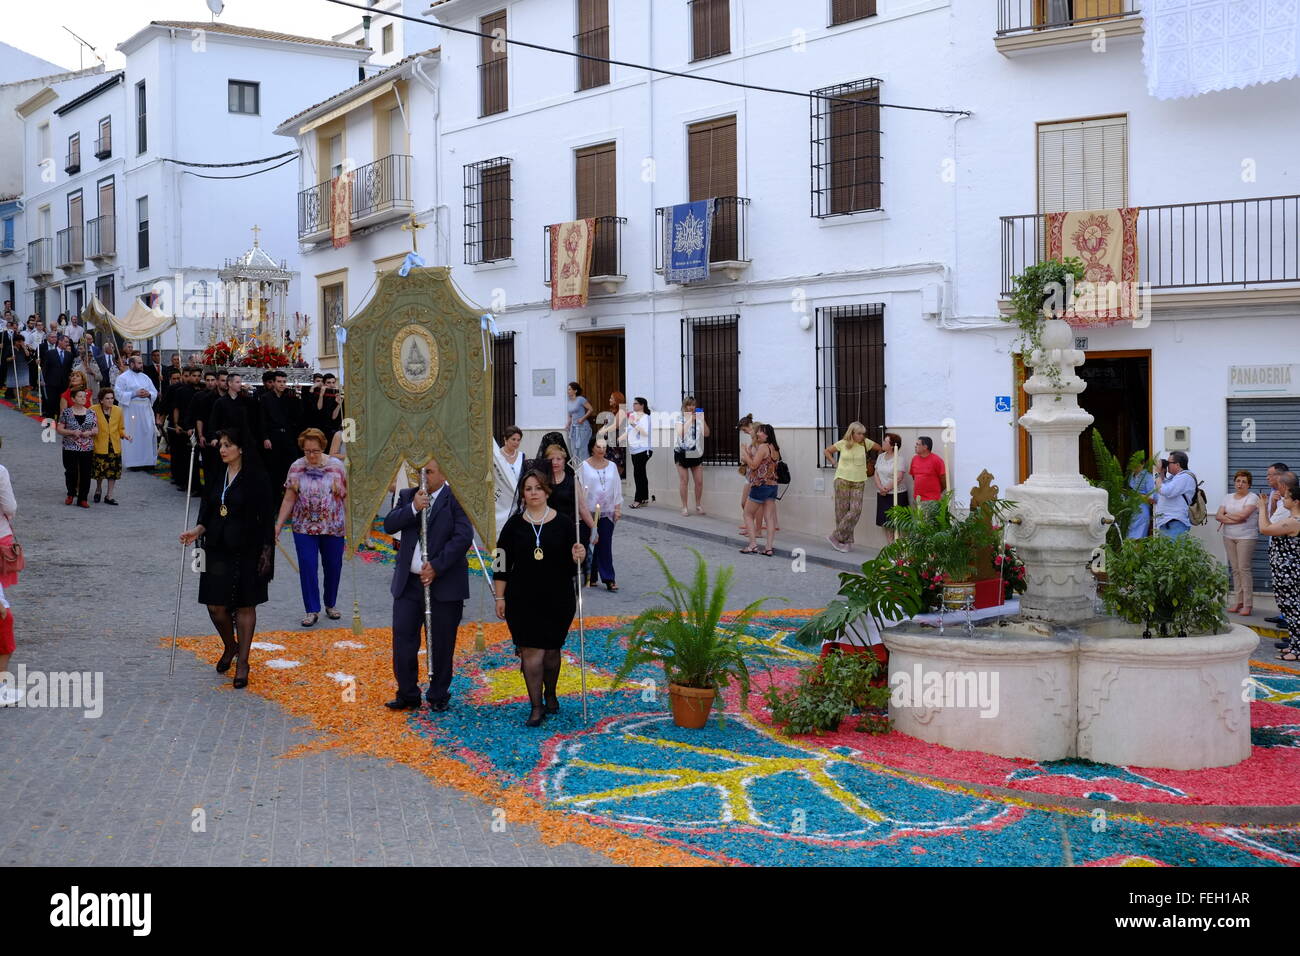 Corpus Christi procession on carpets of coloured wood chippings laid down on the streets of Carcabuey, Cordoba Province, Andalusia, Sapin Stock Photo